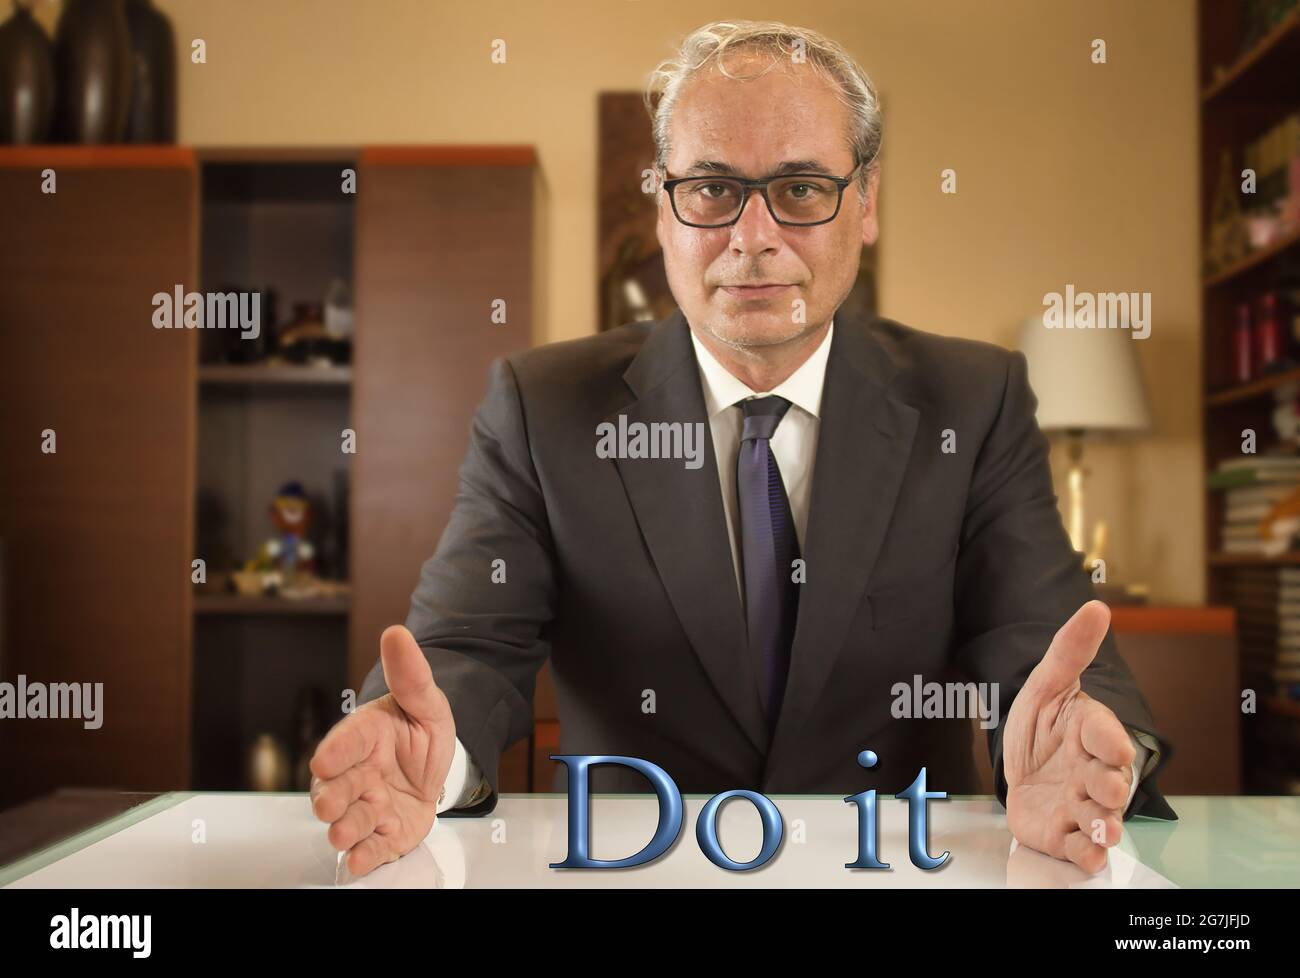 businessman with open arms looking confidently in front over the text do it Stock Photo